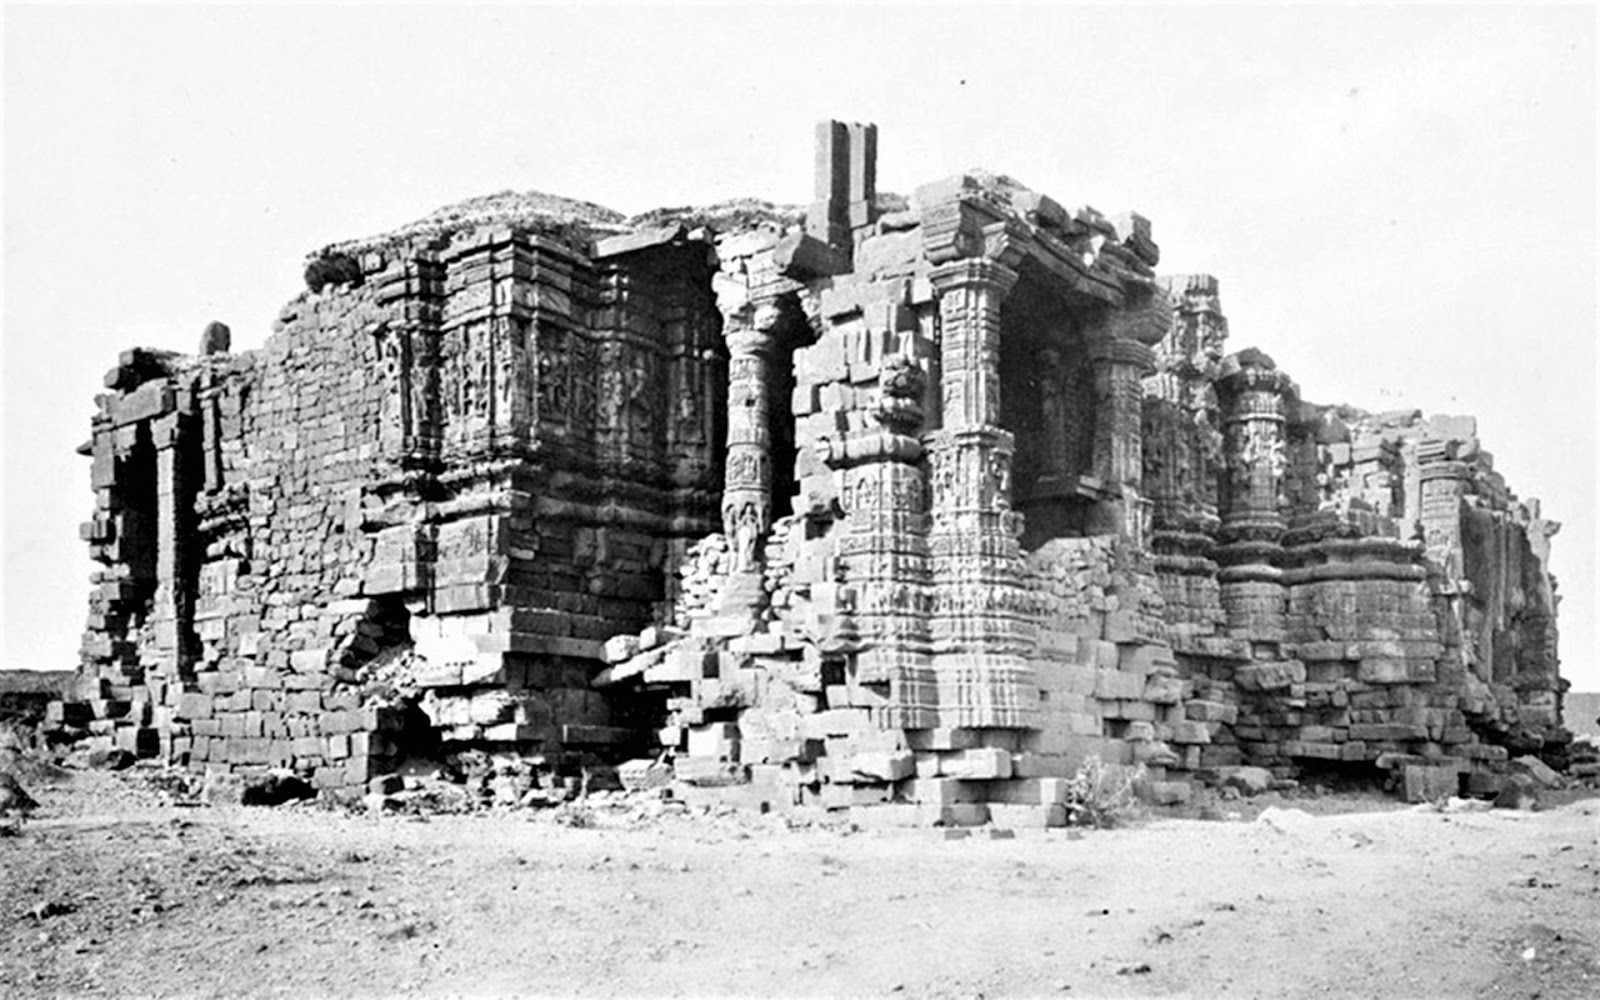 Image of The Somnath Temple in Gujarat from the 1800s